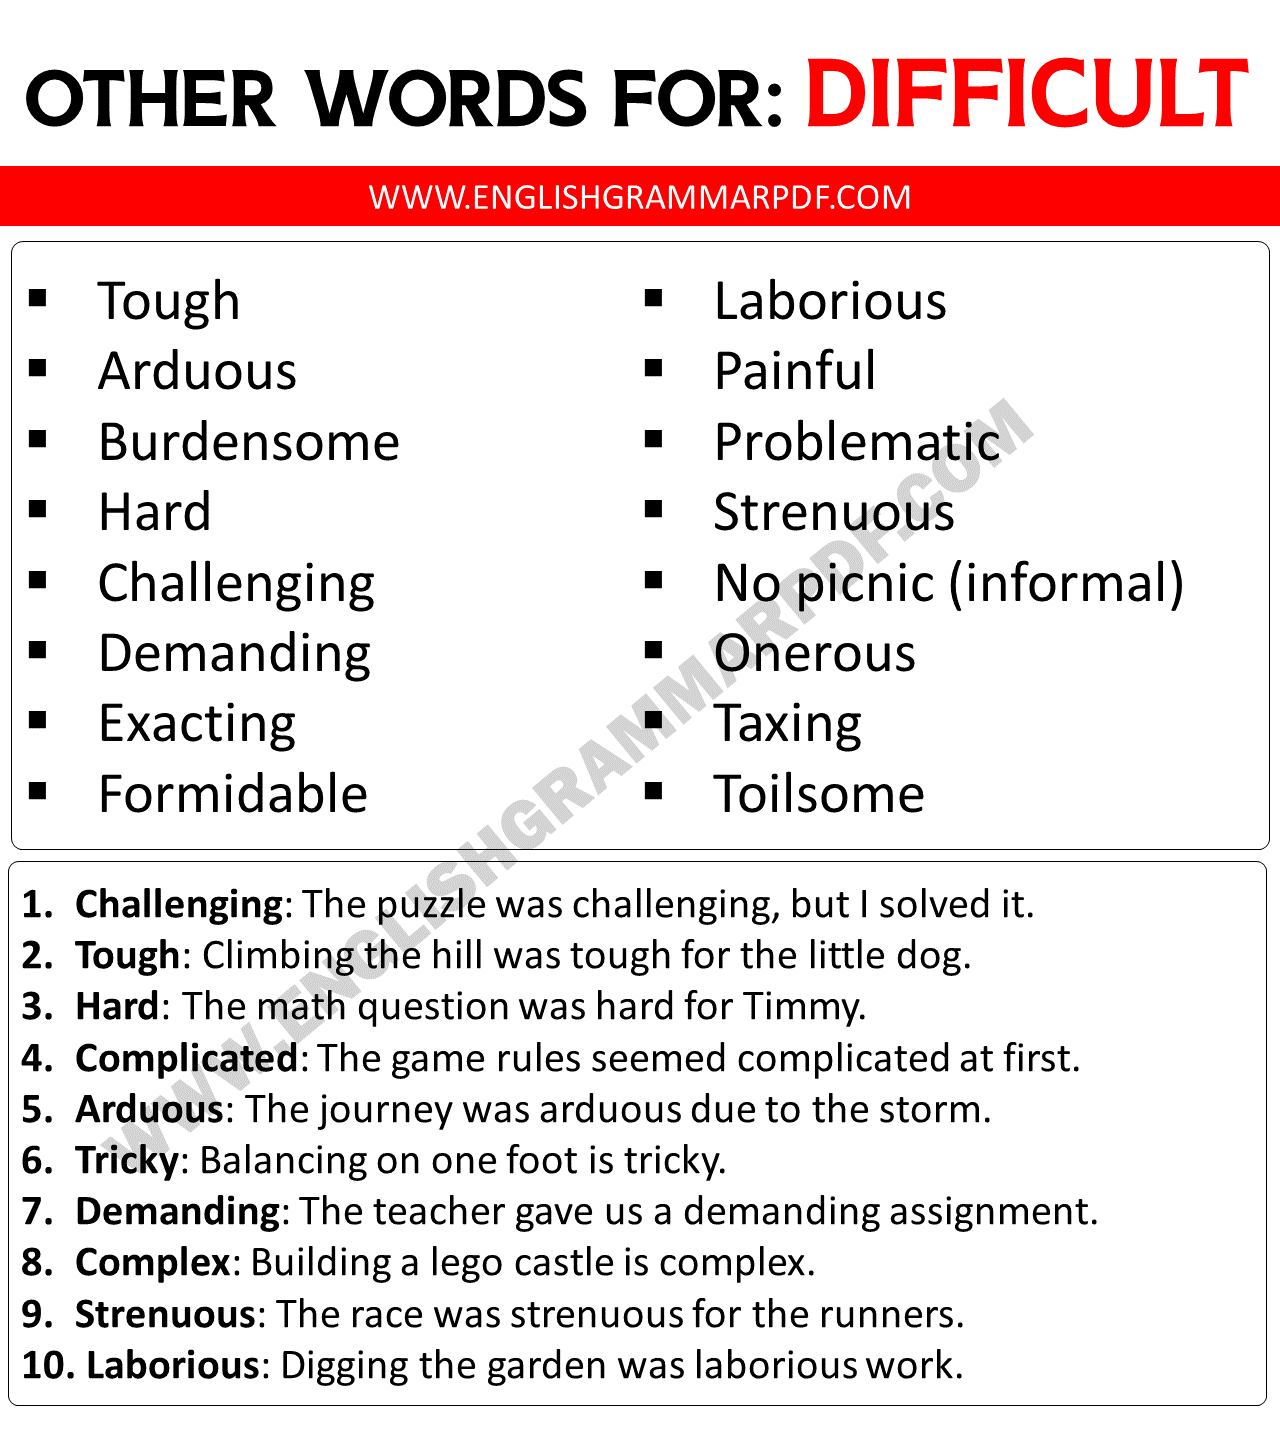 Other Words for Difficult